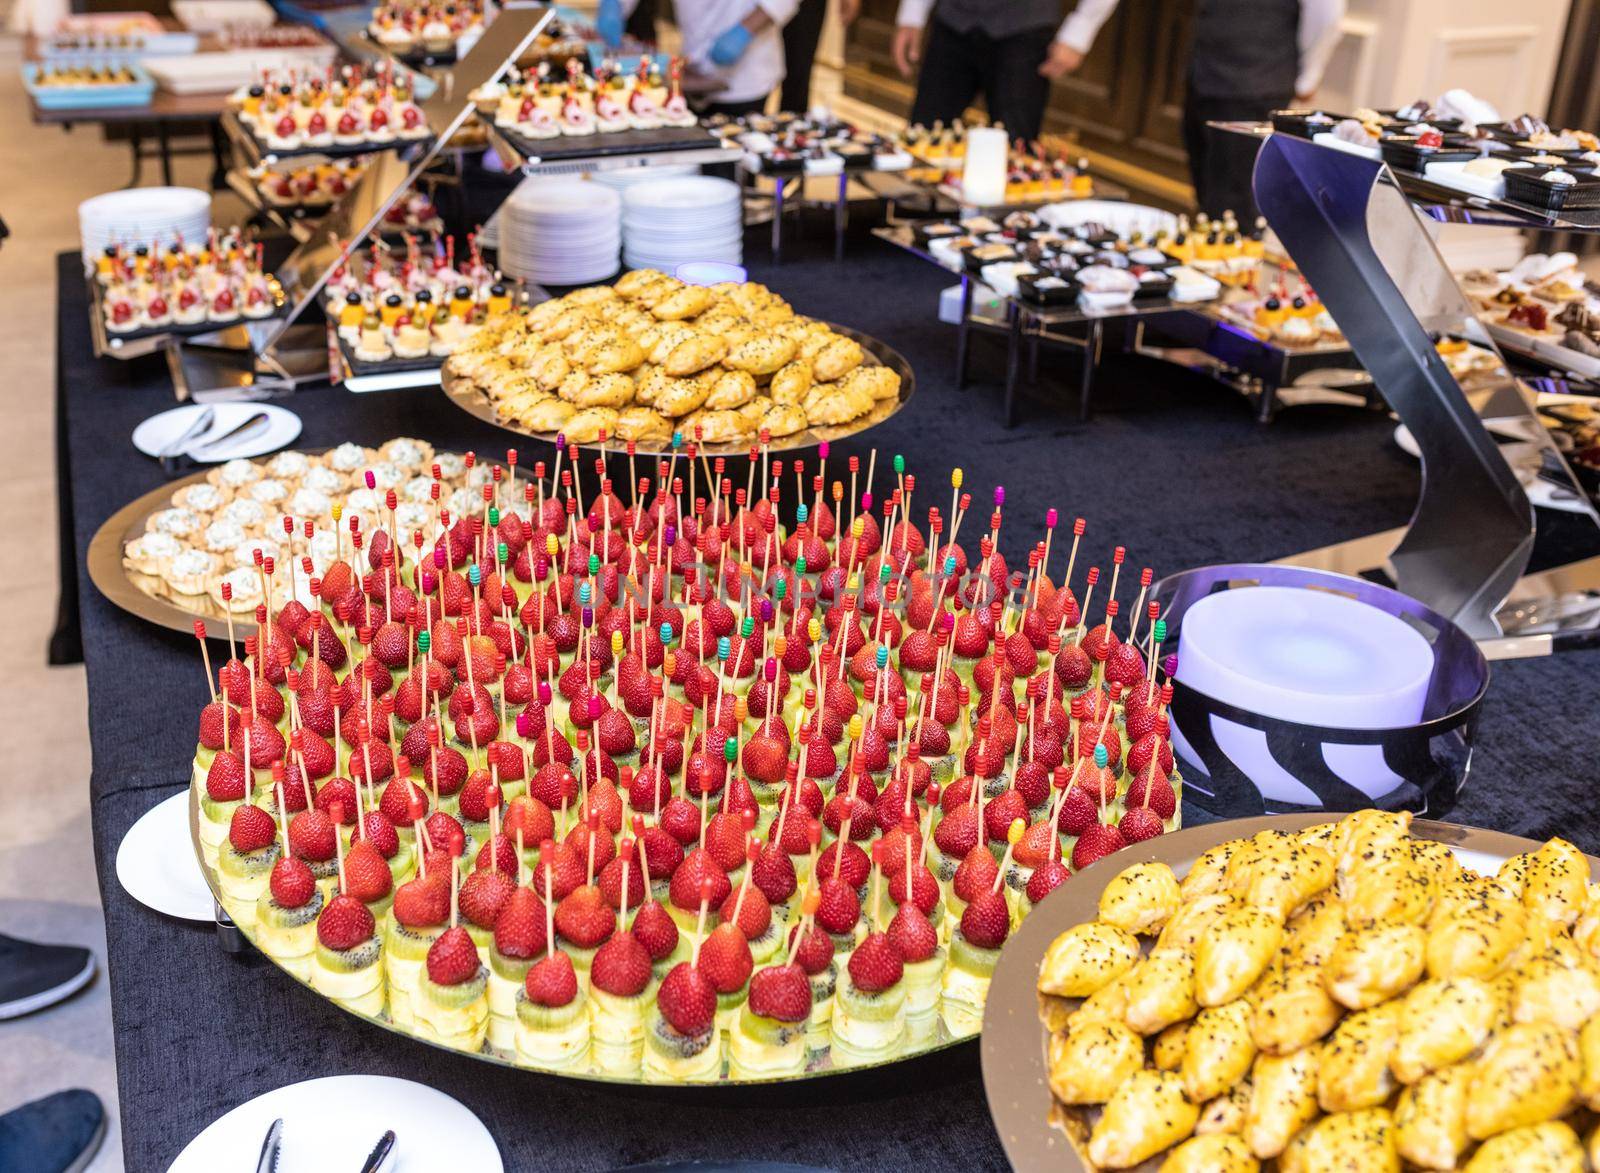 Snacks, garnish on the table at event by ferhad